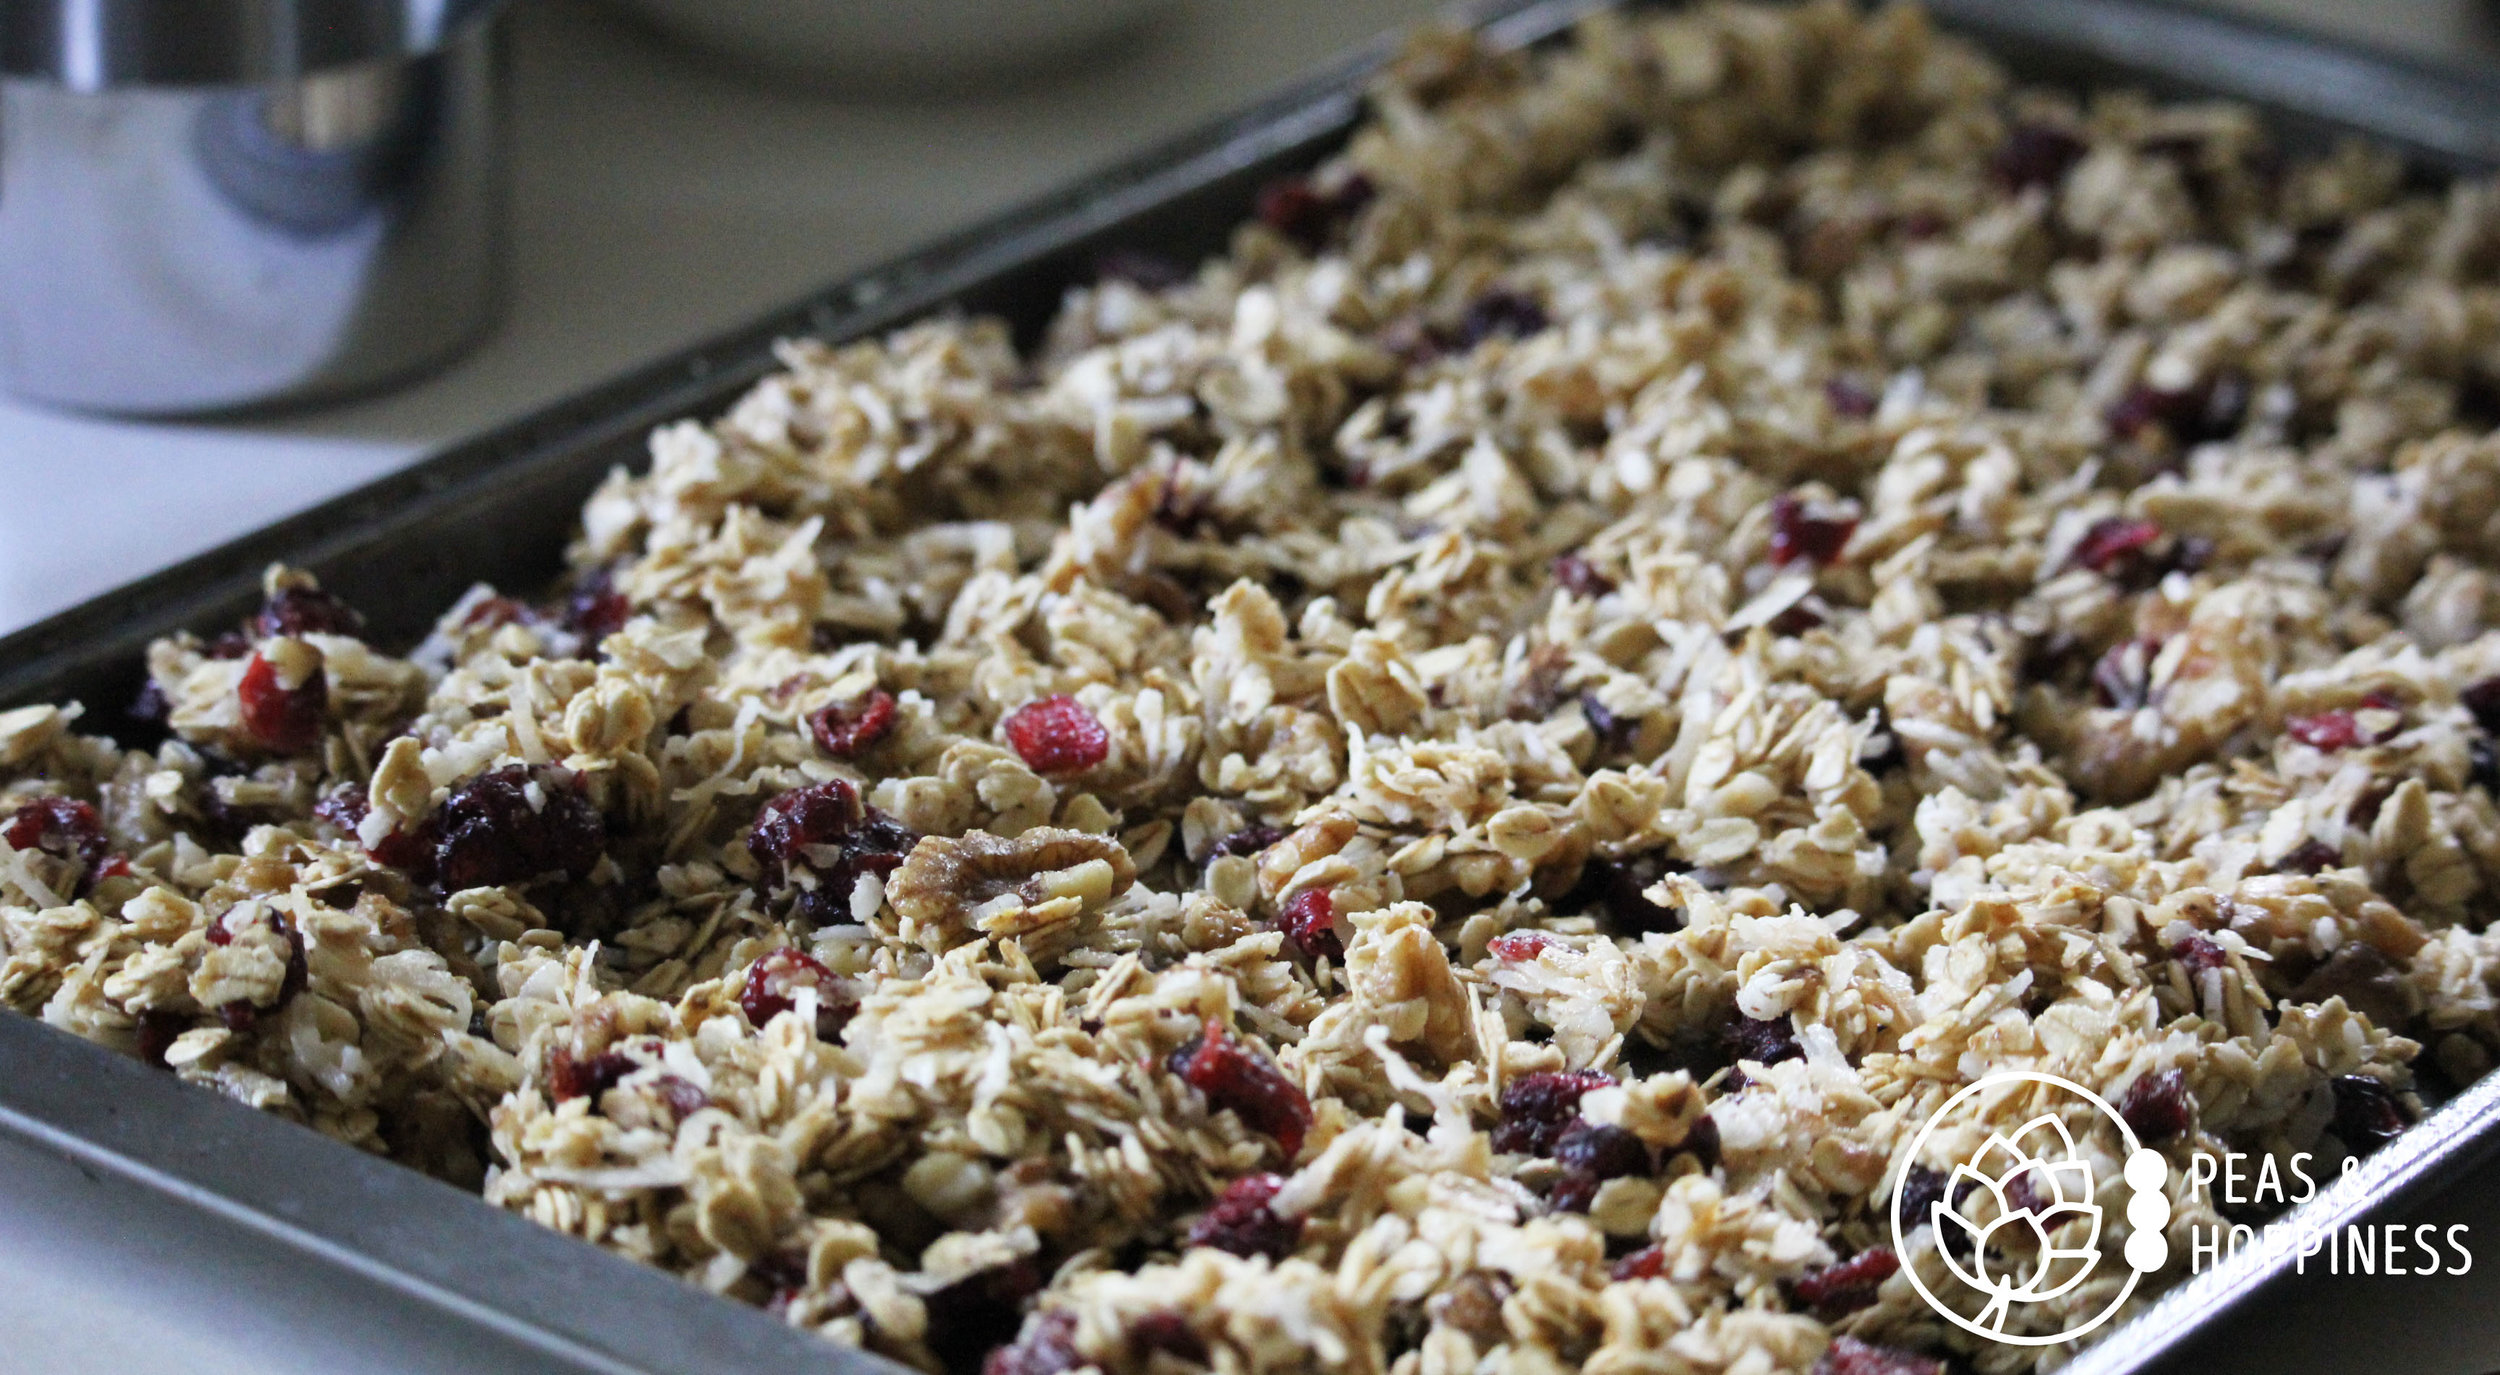 Easy Coconut Cranberry Granola from Peas and Hoppiness - www.peasandhoppiness.com